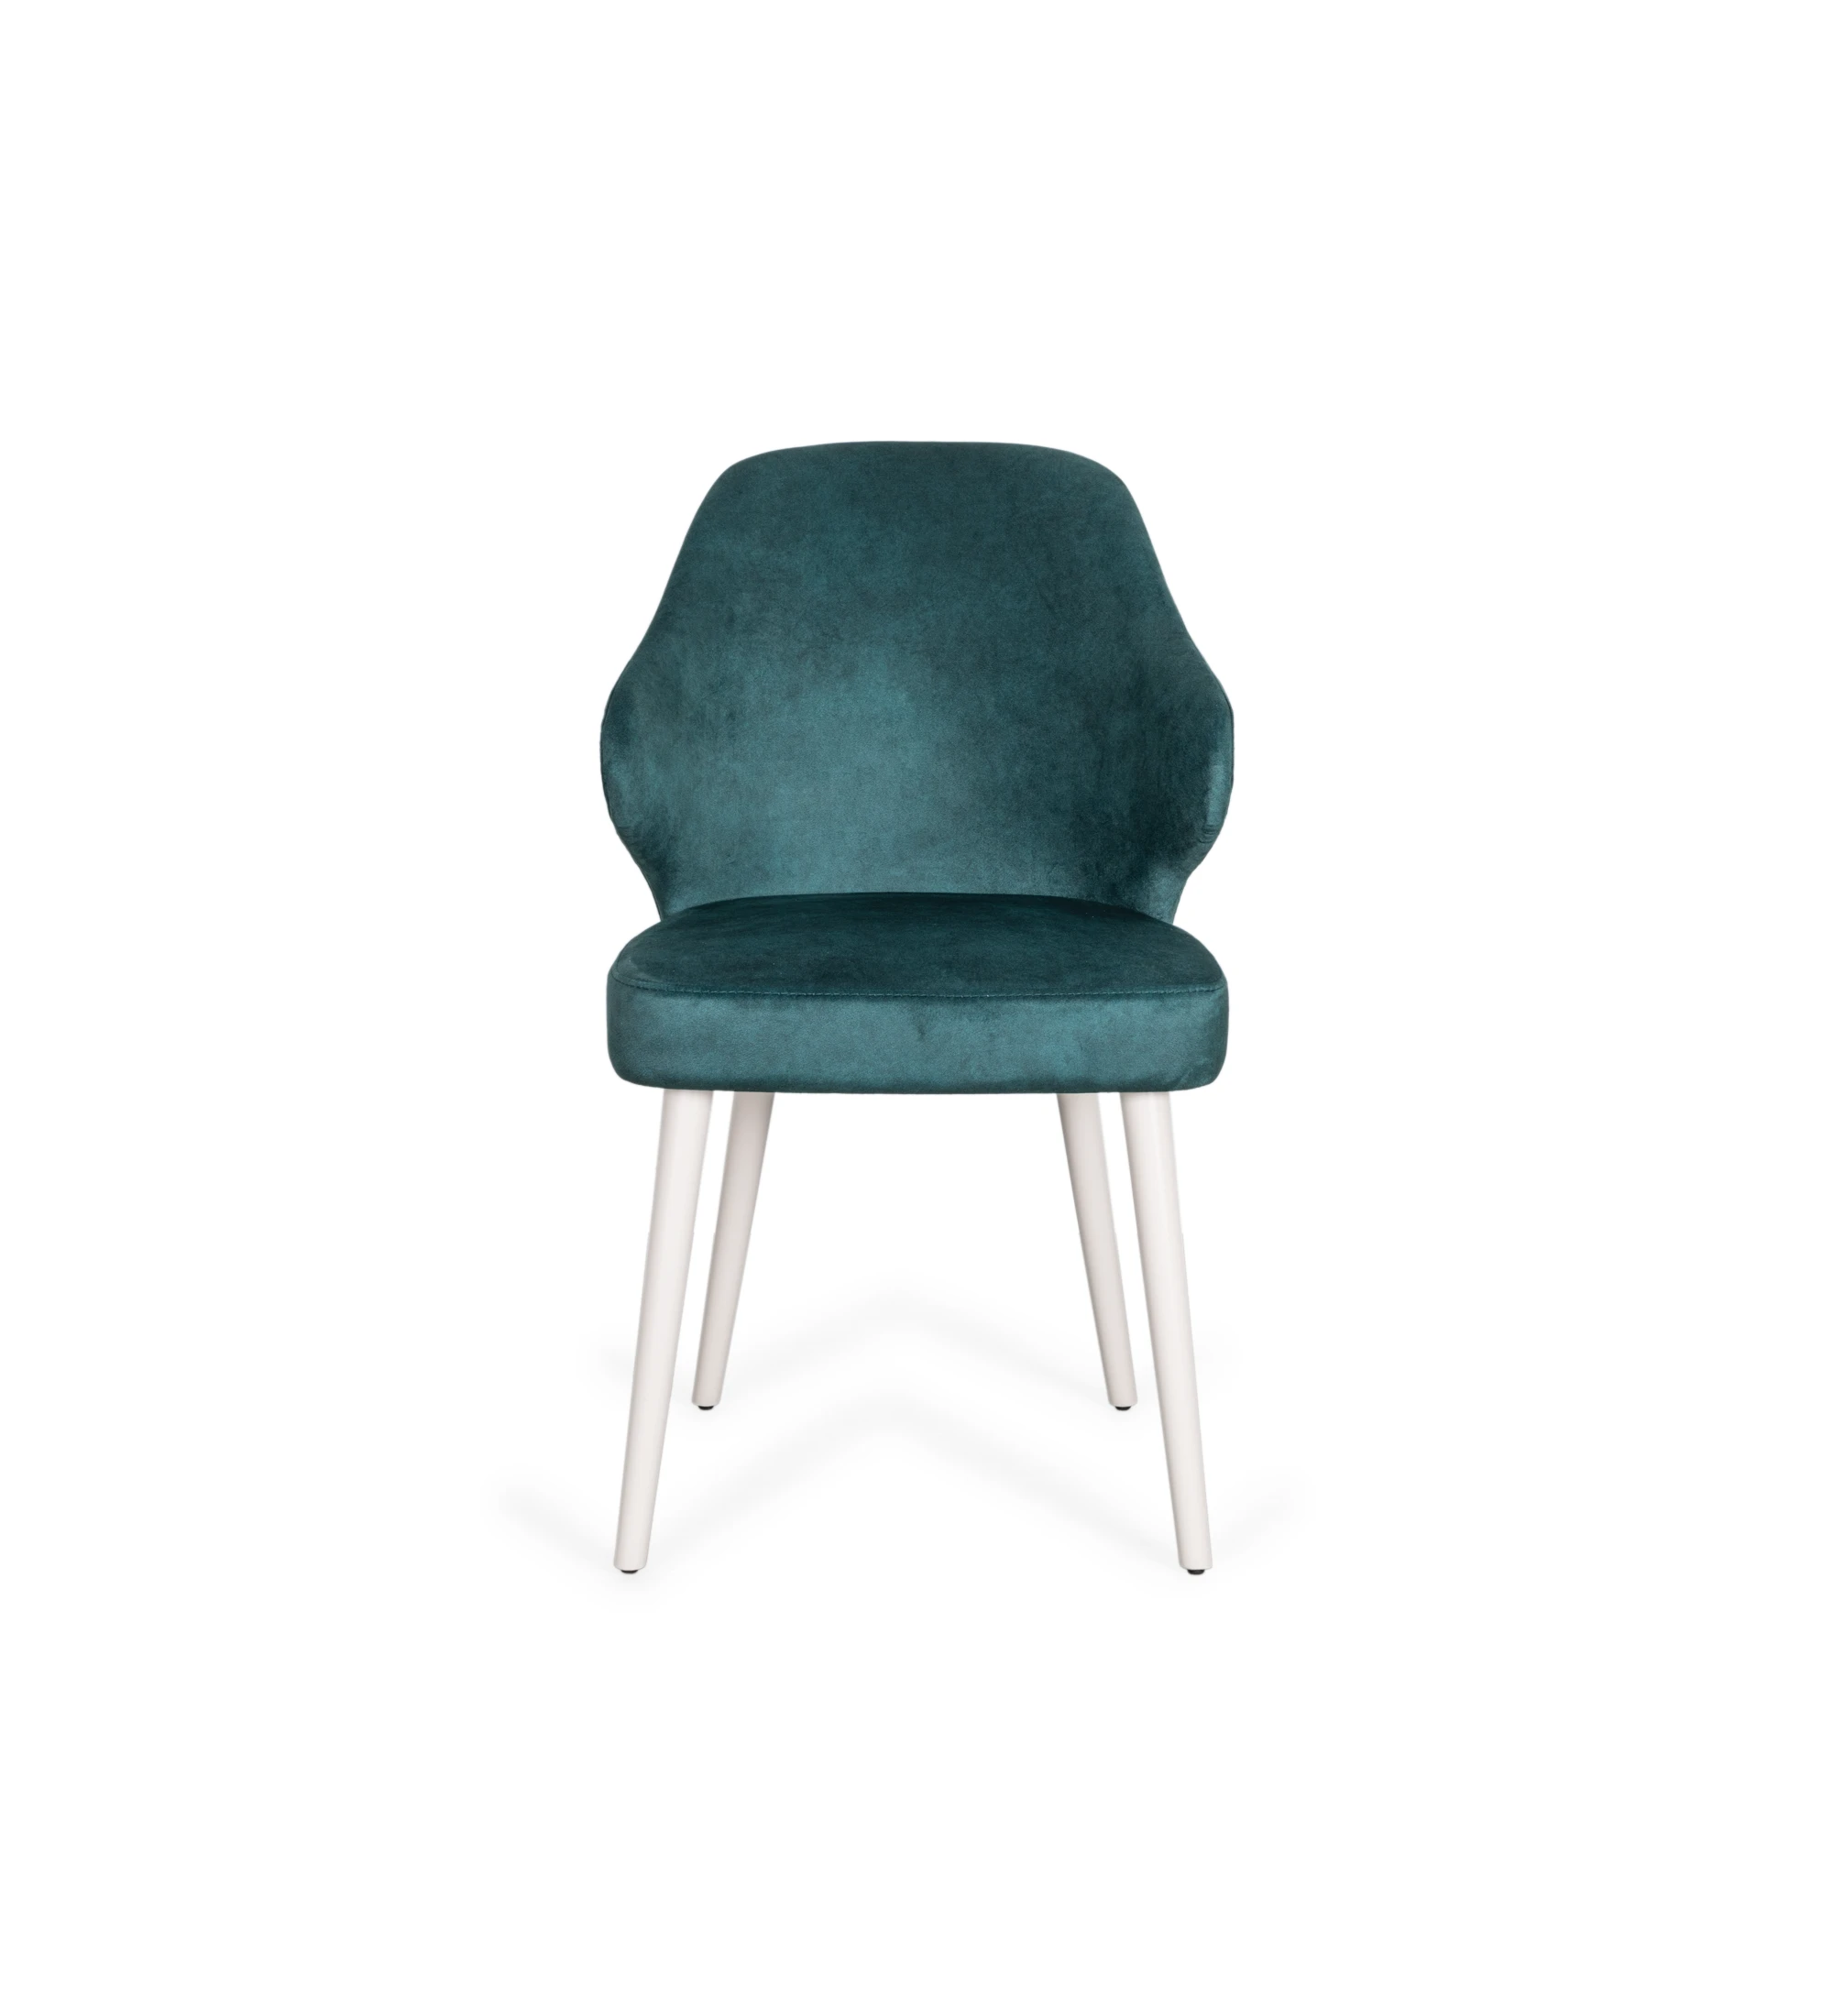 Chair upholstered in petroleum blue fabric, feet lacquered in pearl.